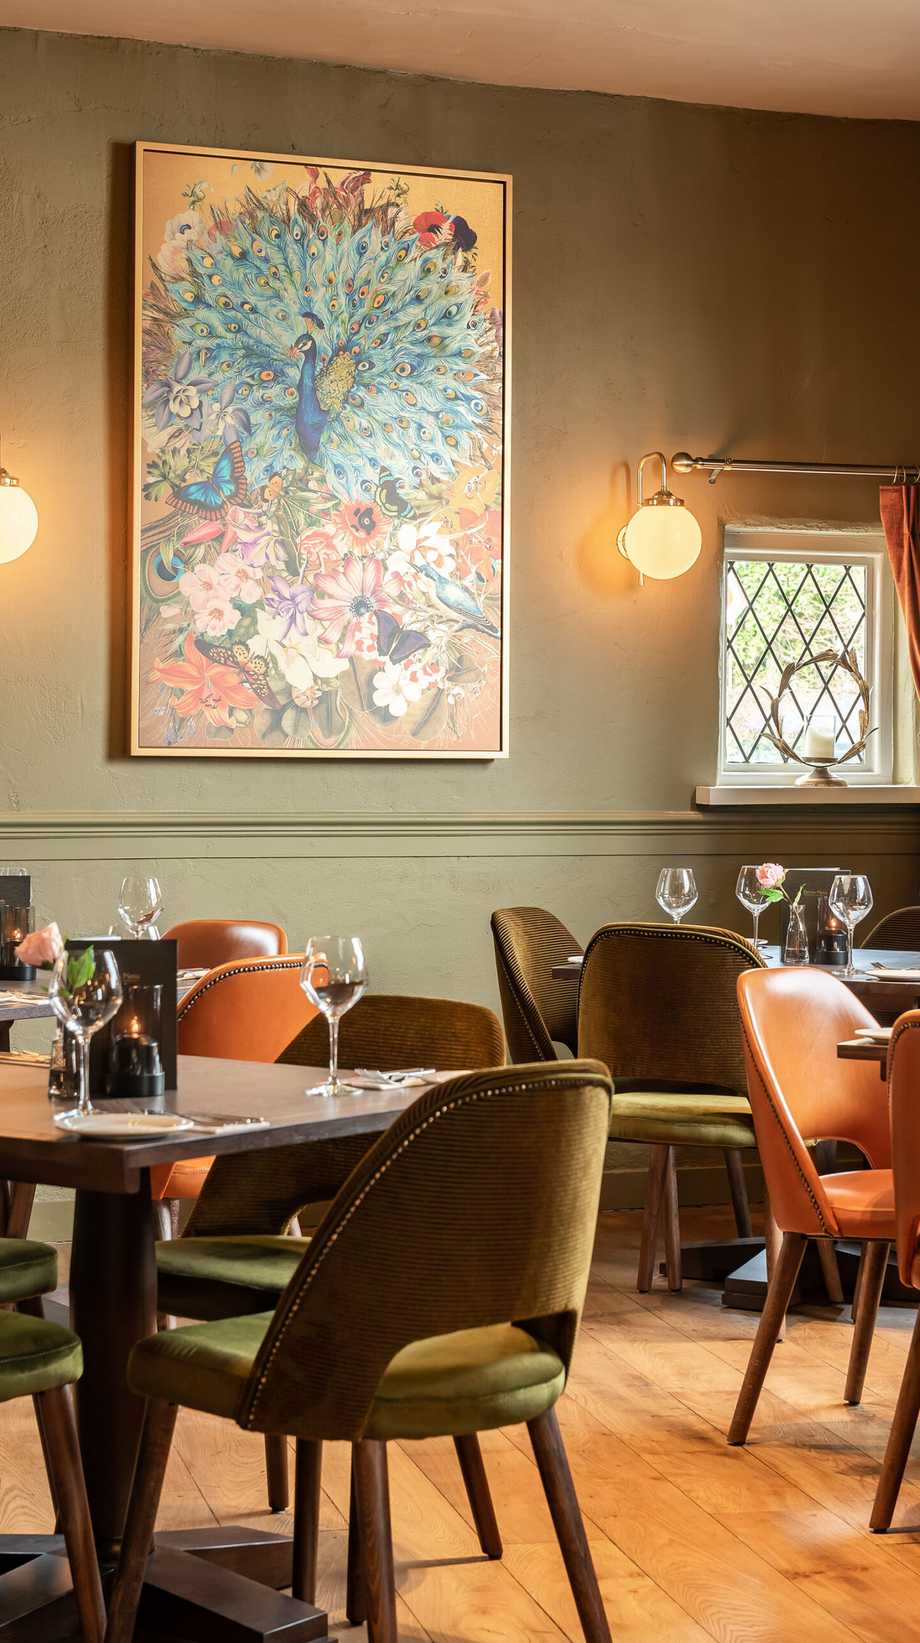 An empty pub awaits guests with soft lighting, eye-catching floral artwork, and dark green walls.